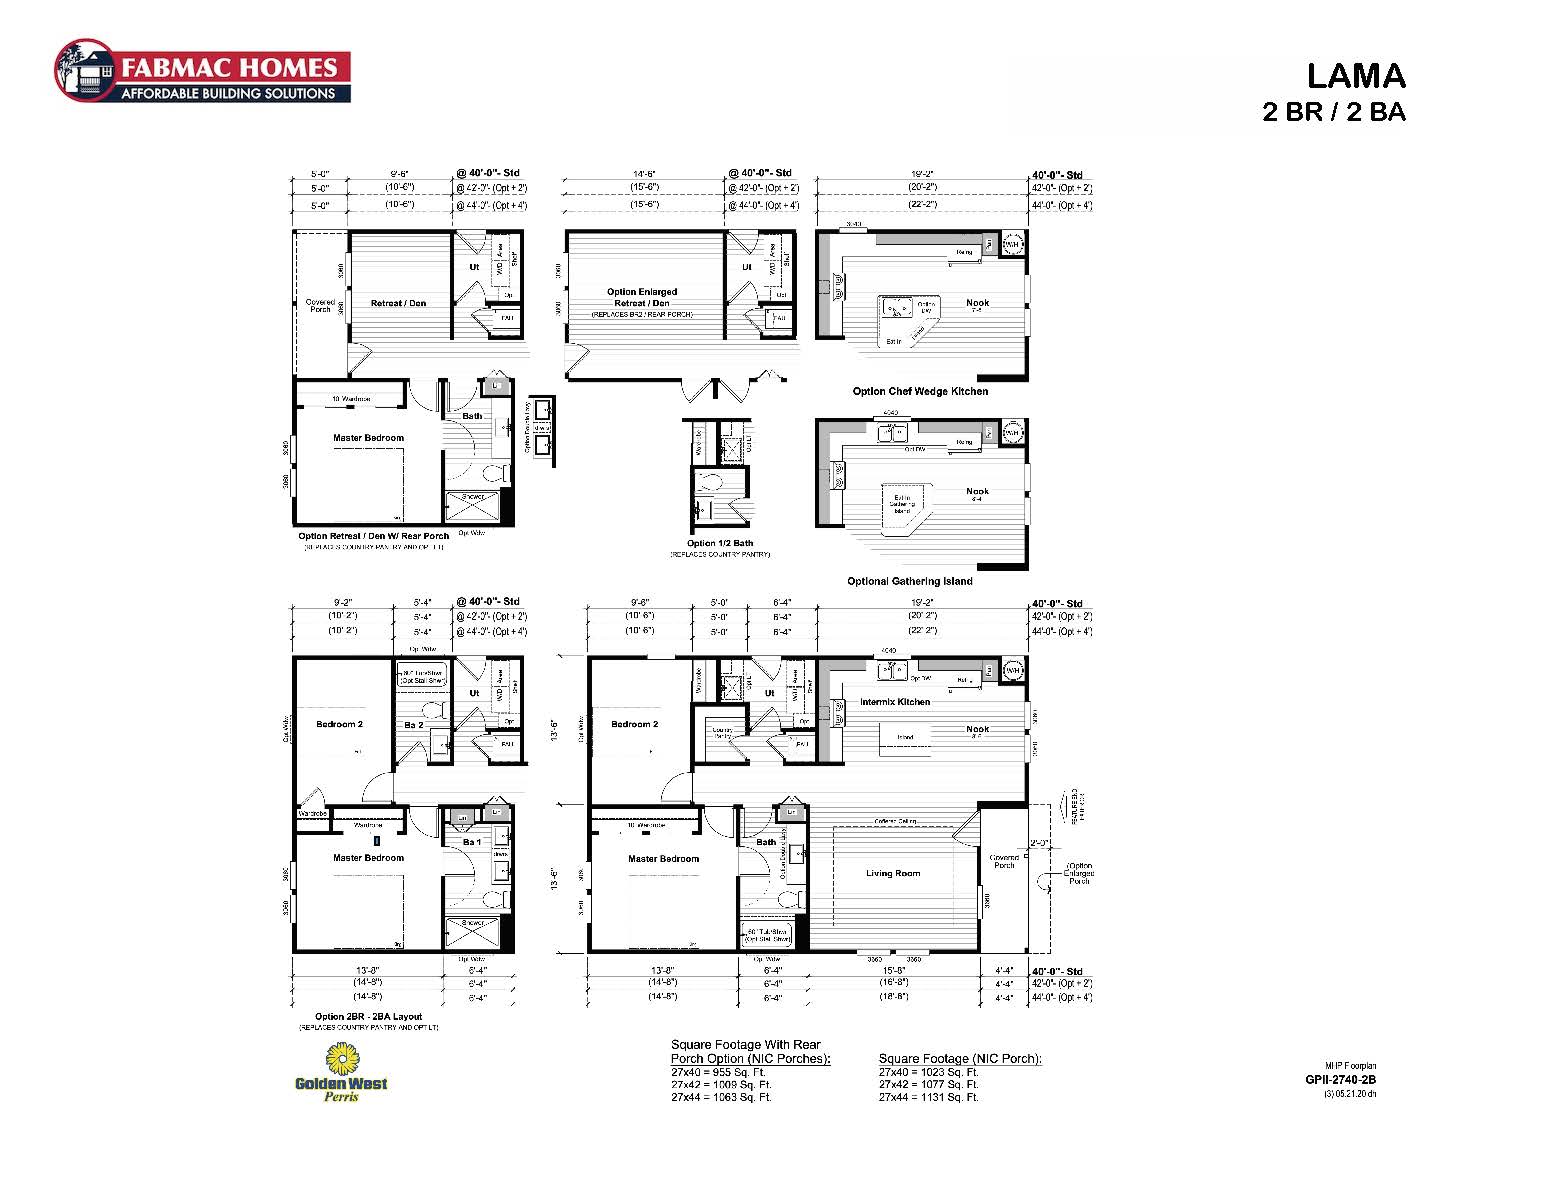 New floor plan for the Lama